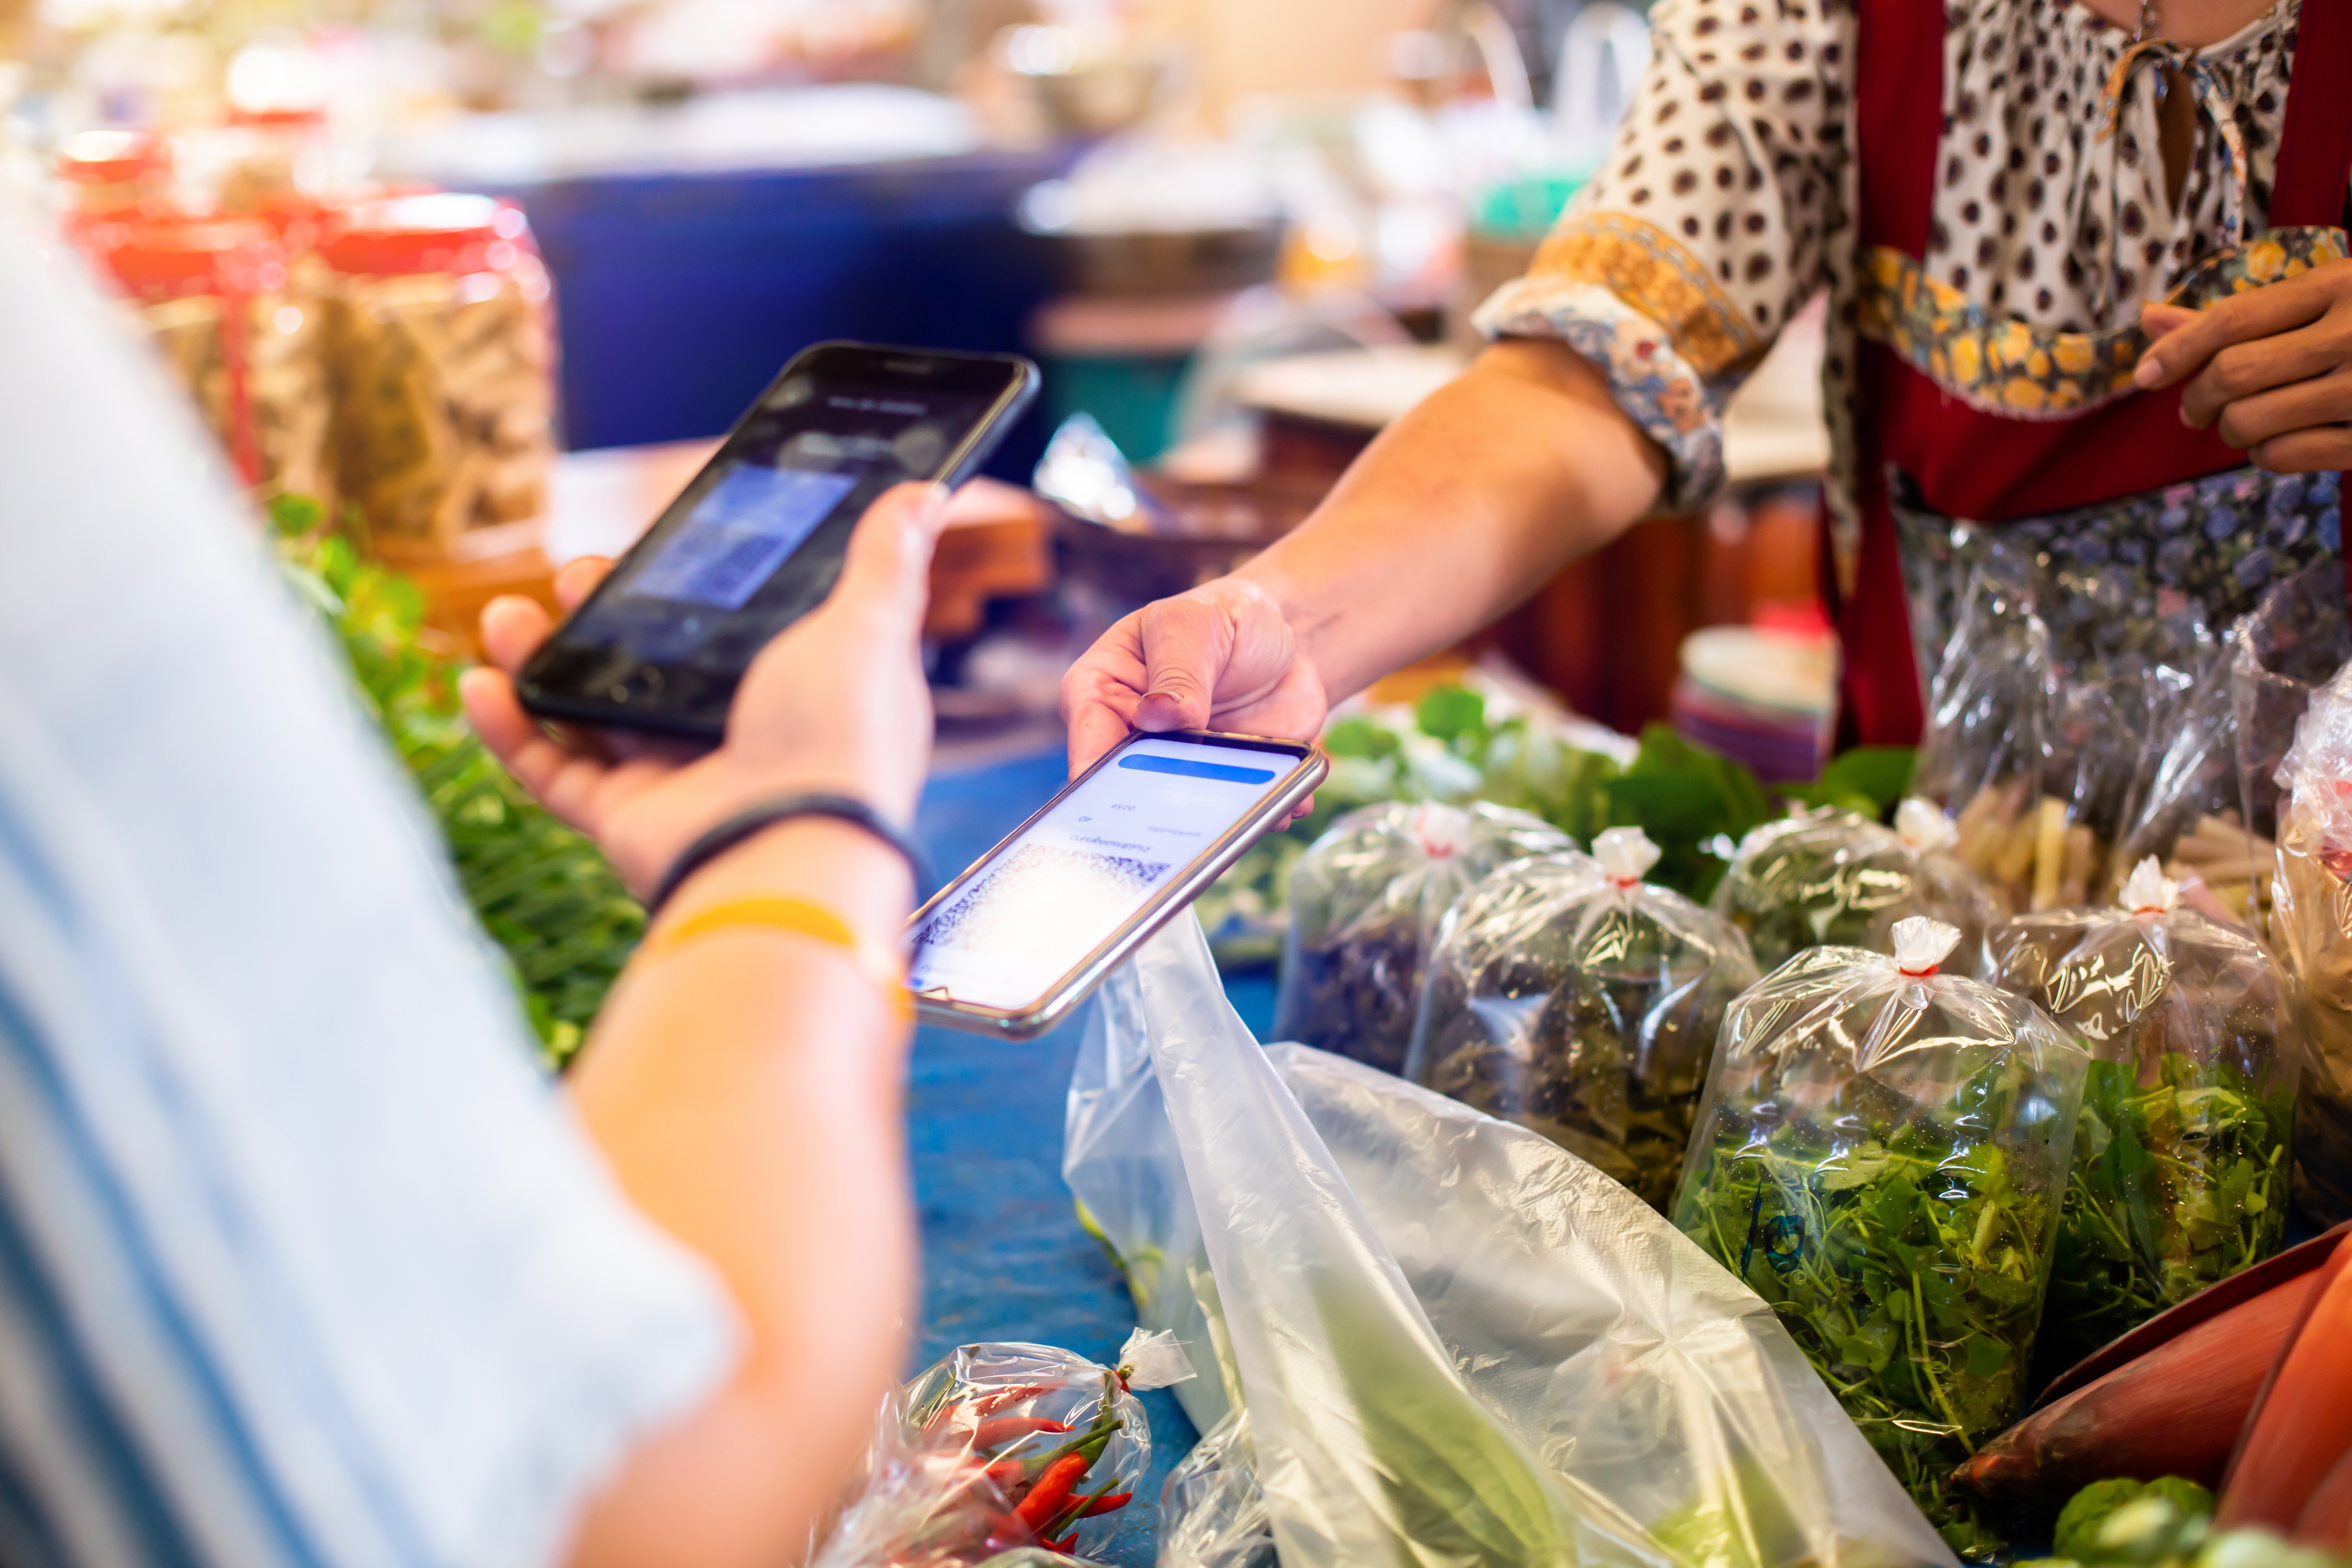 shopper purchasing produce with digital payment